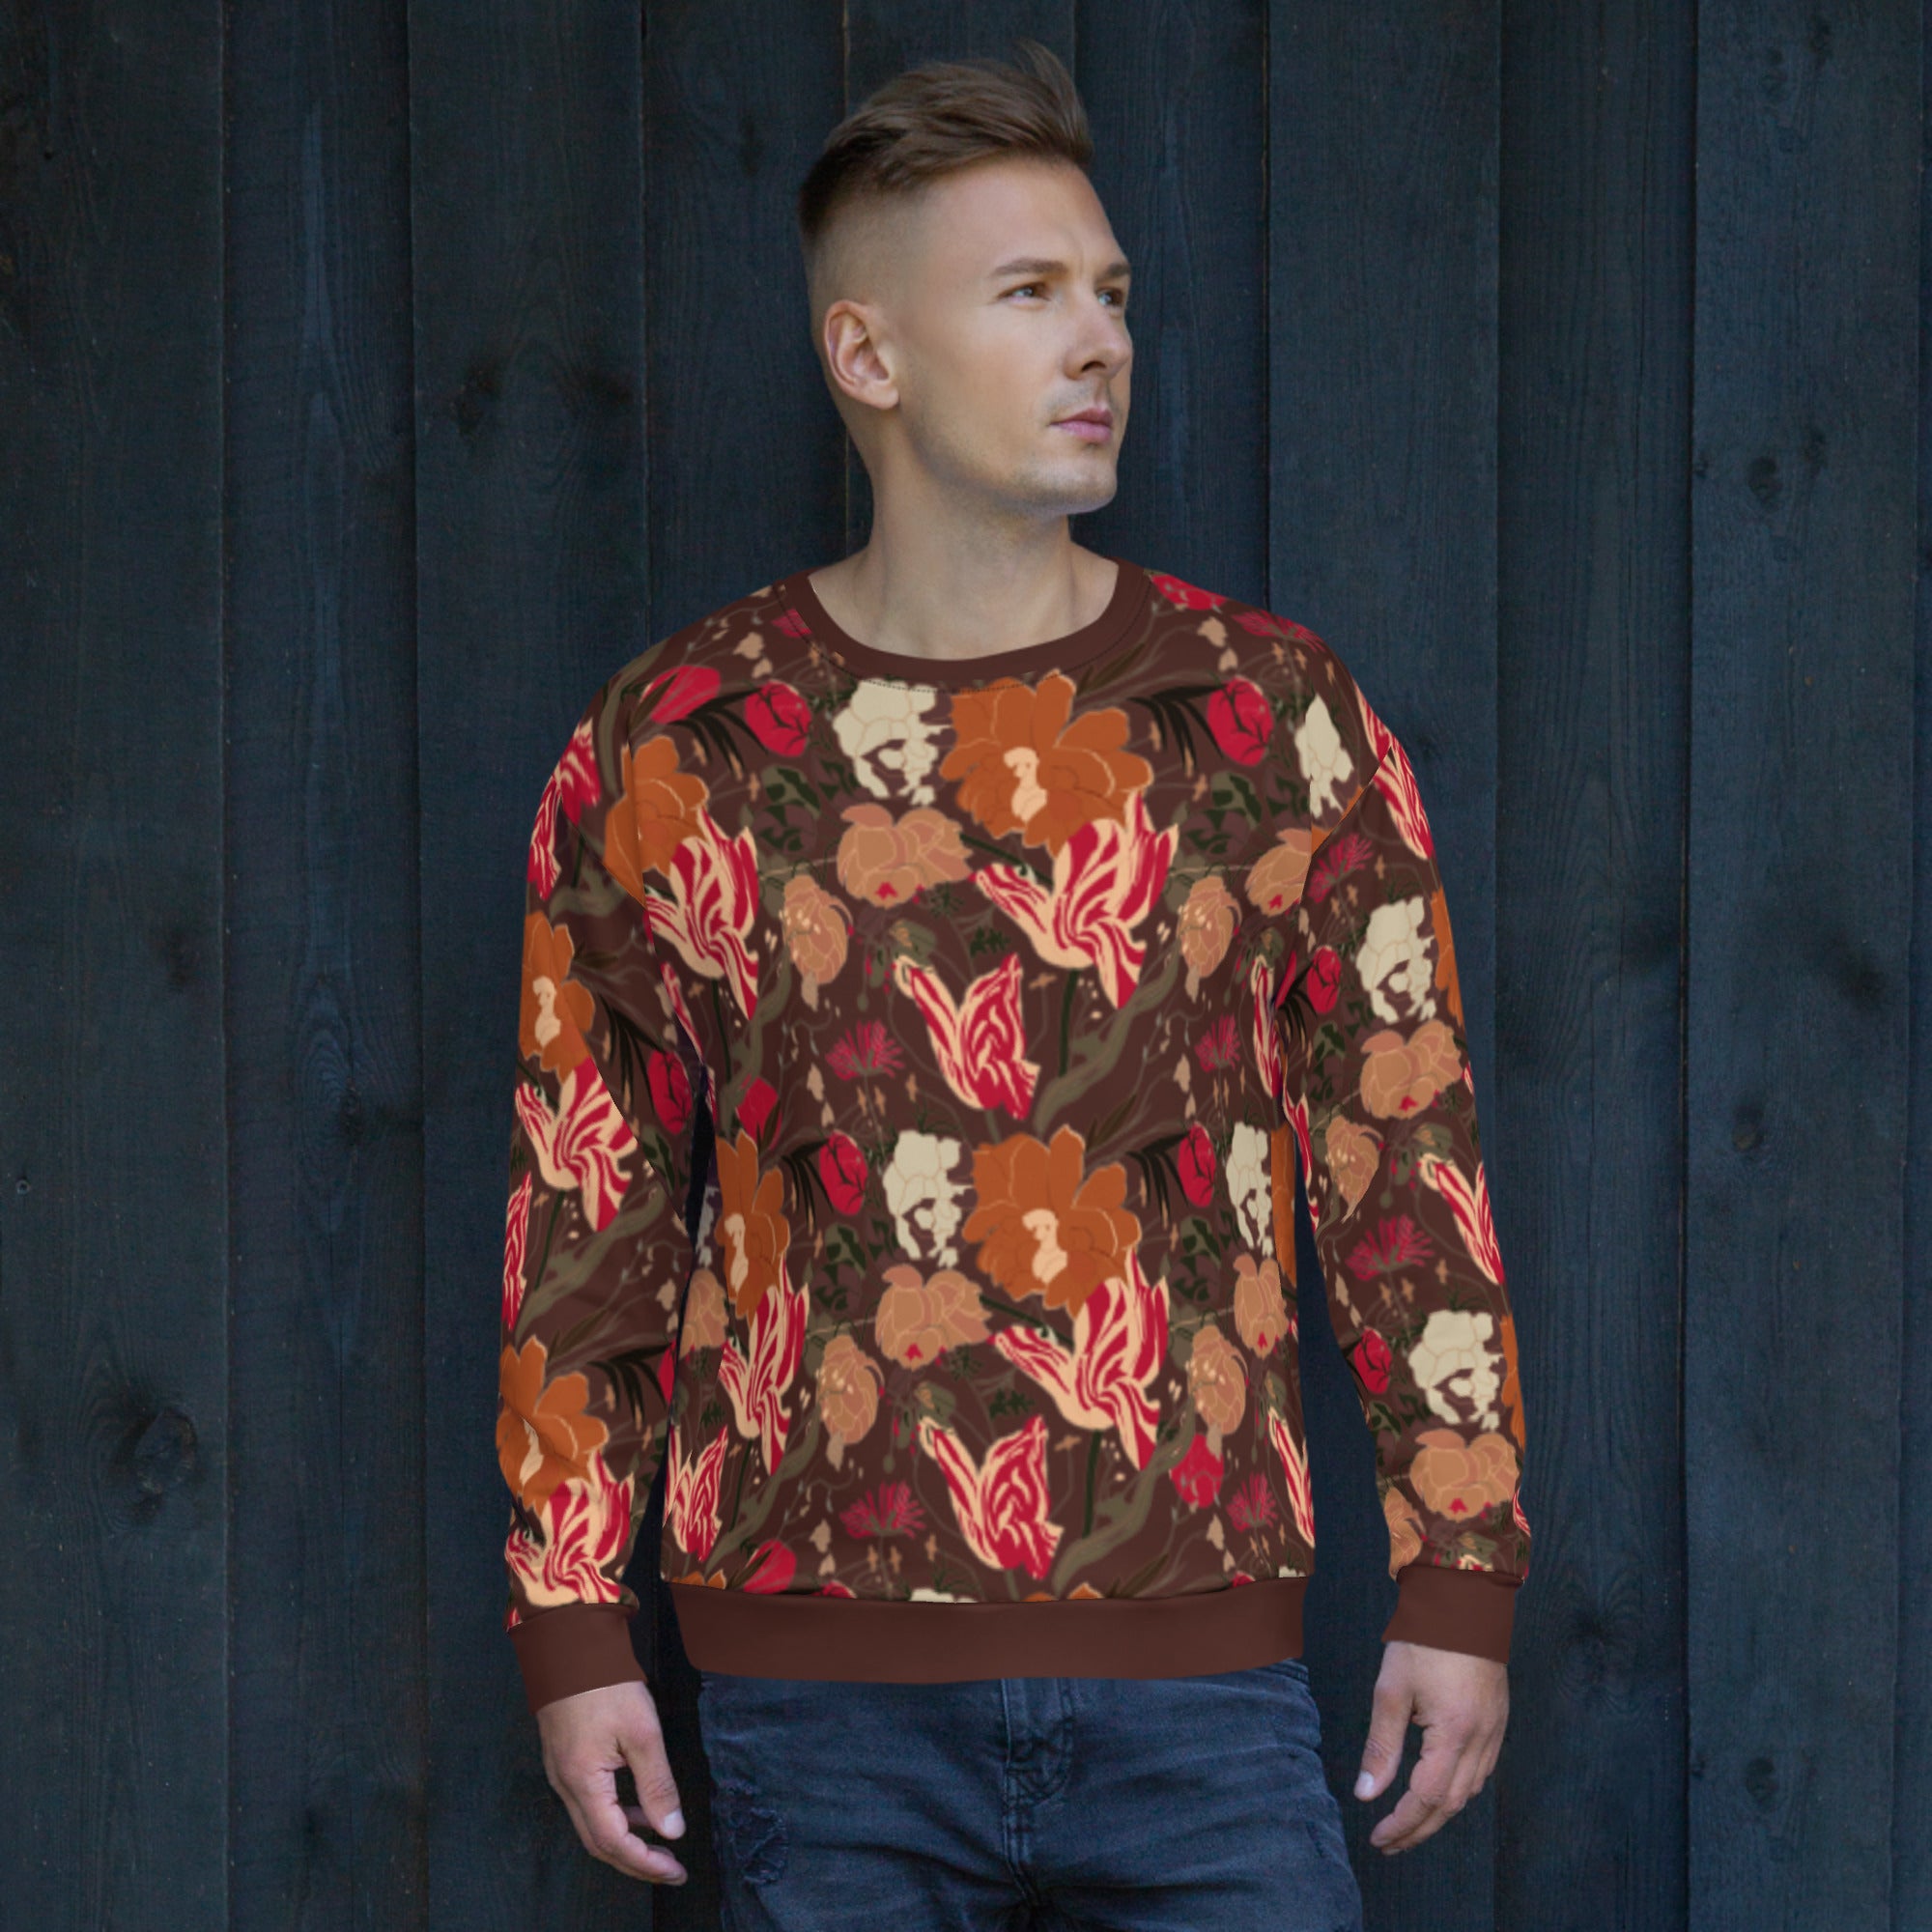 Victorian gothic dark academia and dark cottagecore all-over print floral sweatshirt in ox-blood red with viva magenta tulips and rich browns and oranges. Unisex long sleeve with crew neck, waistband and cuffs in matching brown. 